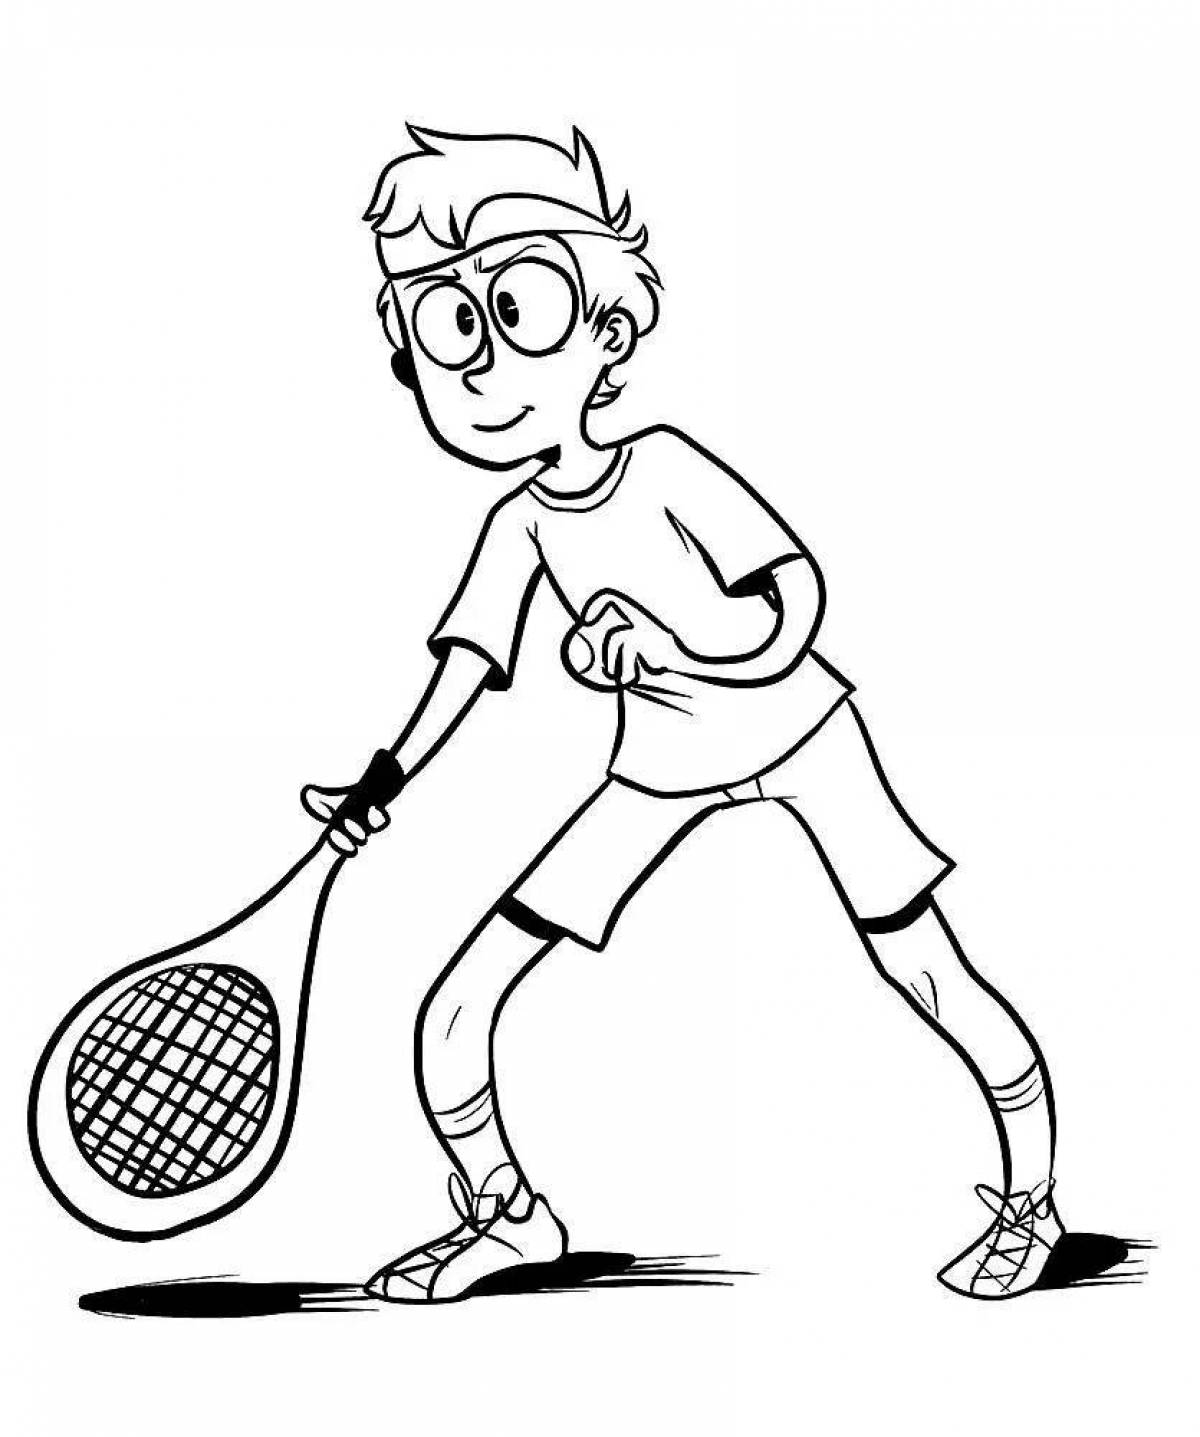 Playful tennis coloring book for kids